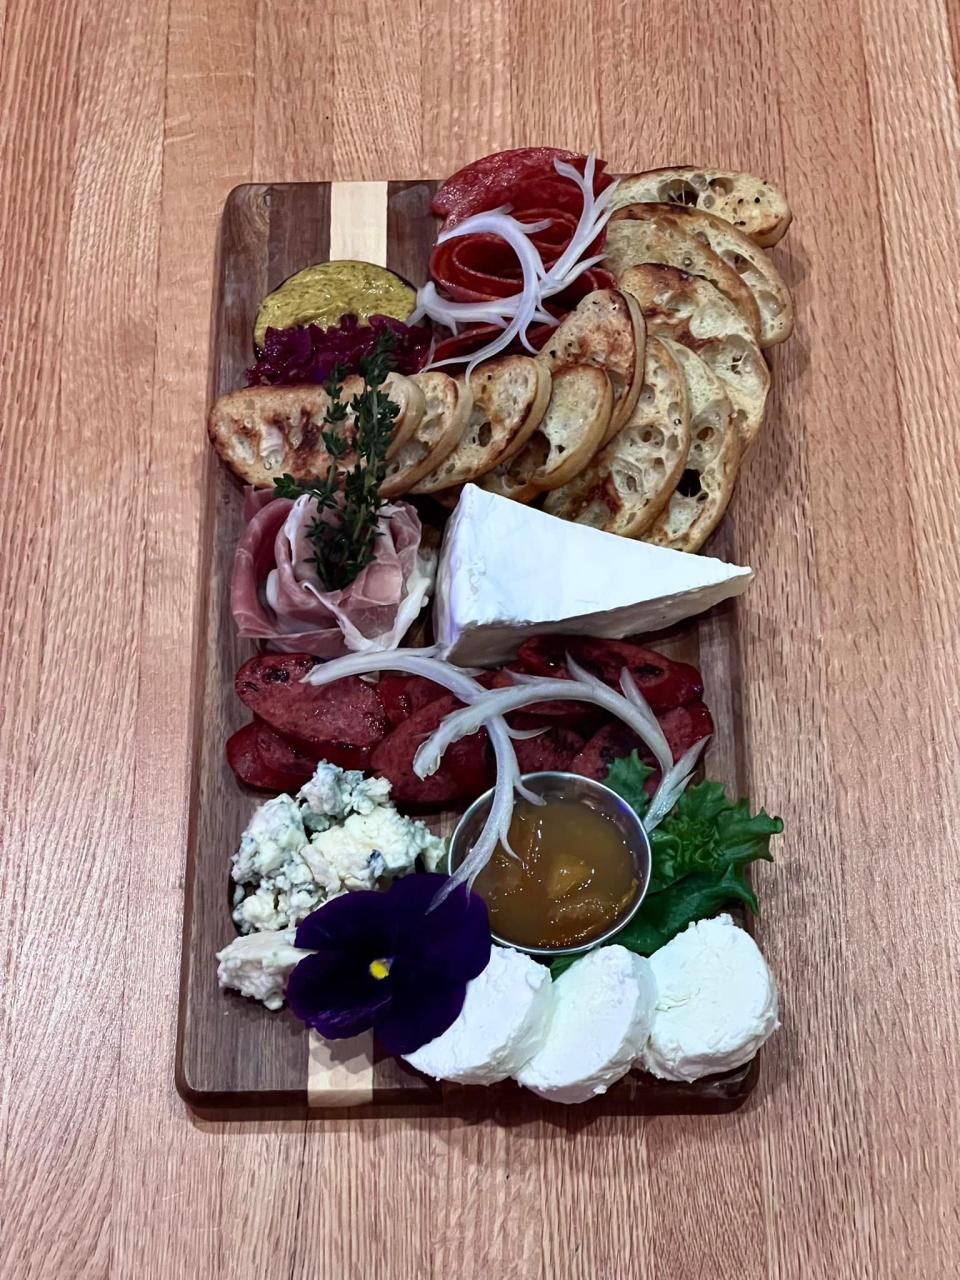 Dig into the Charcuterie Board at 222 Union Restaurant and Bar.